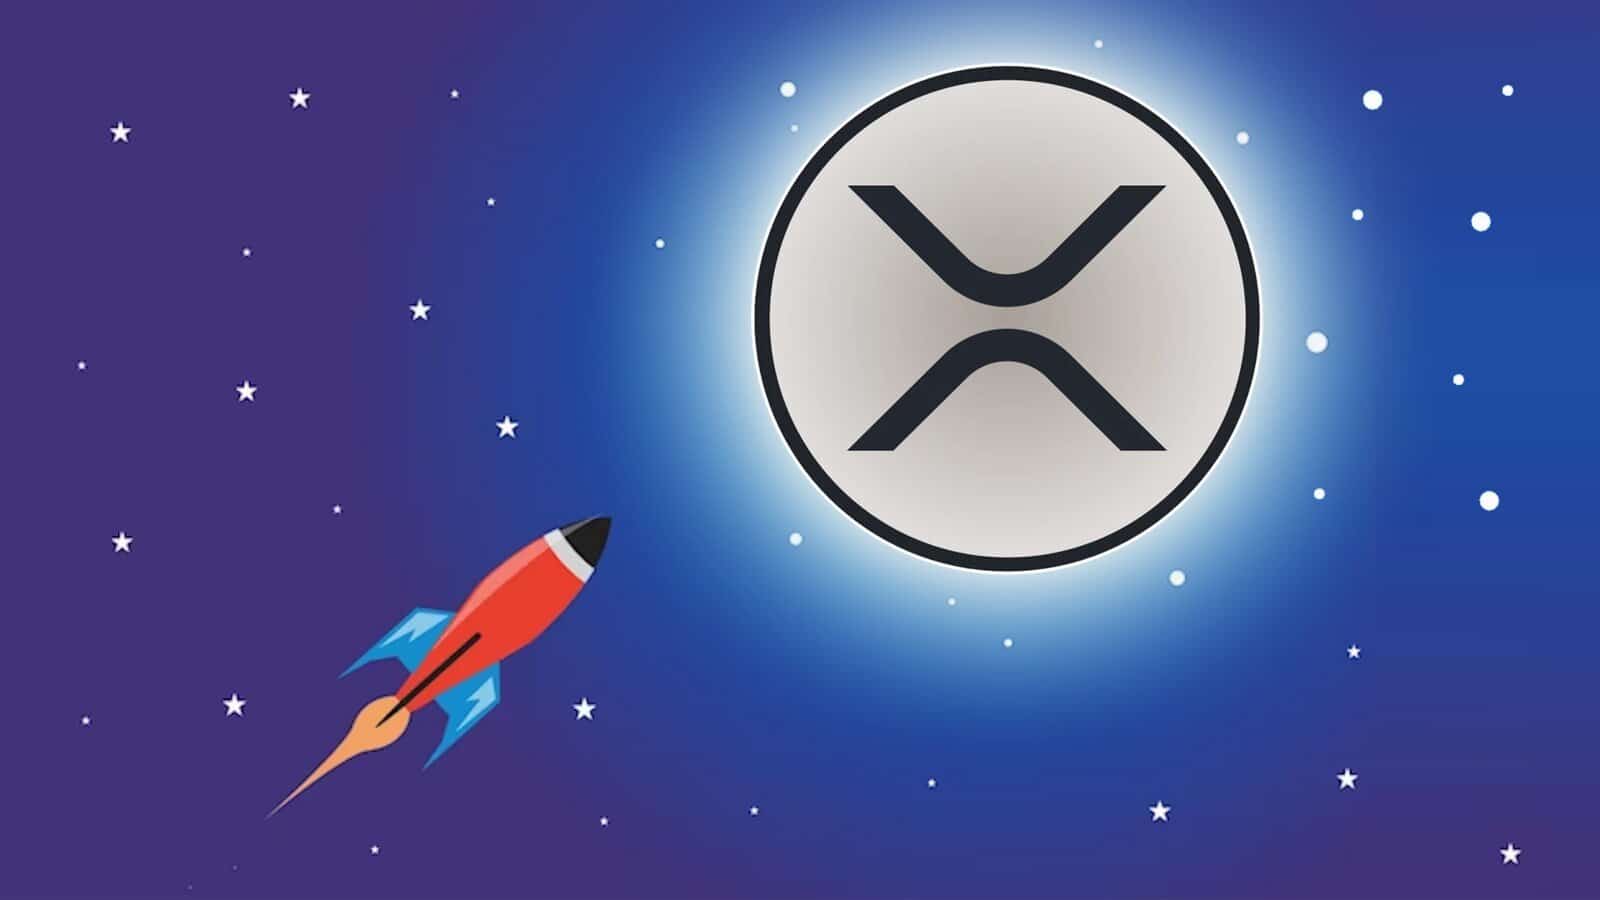 Market Watcher Claims XRP Is Getting Close to a 15x Rise Above $7.5 With Every Daily Candle